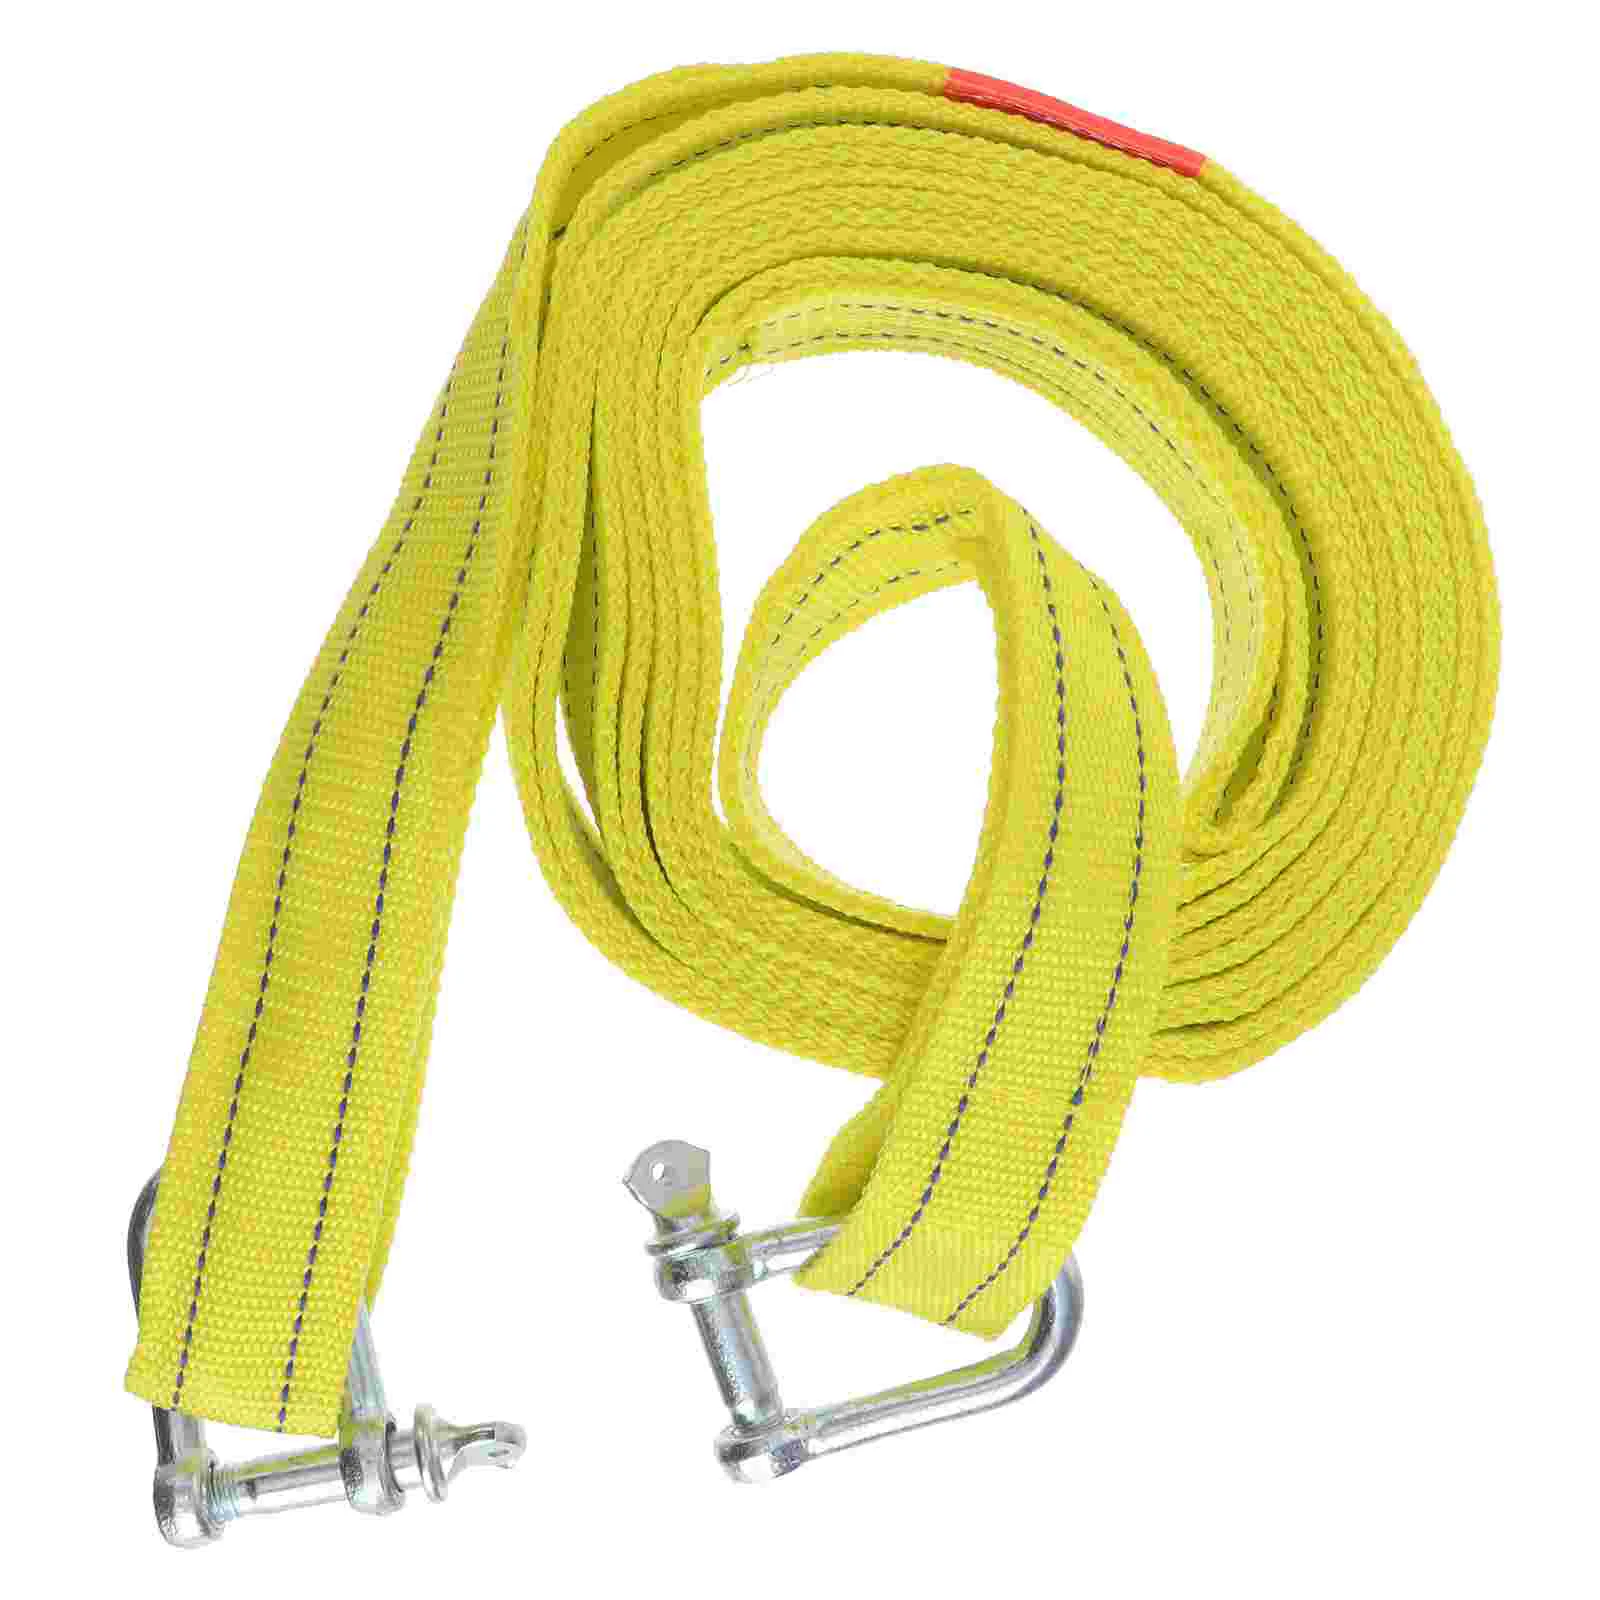 

4.8m 5 Ton Car Trailer Rope Practical Outdoor Emergency Kit Polyester Double Layers Thicken Tow Rope (Yellow)